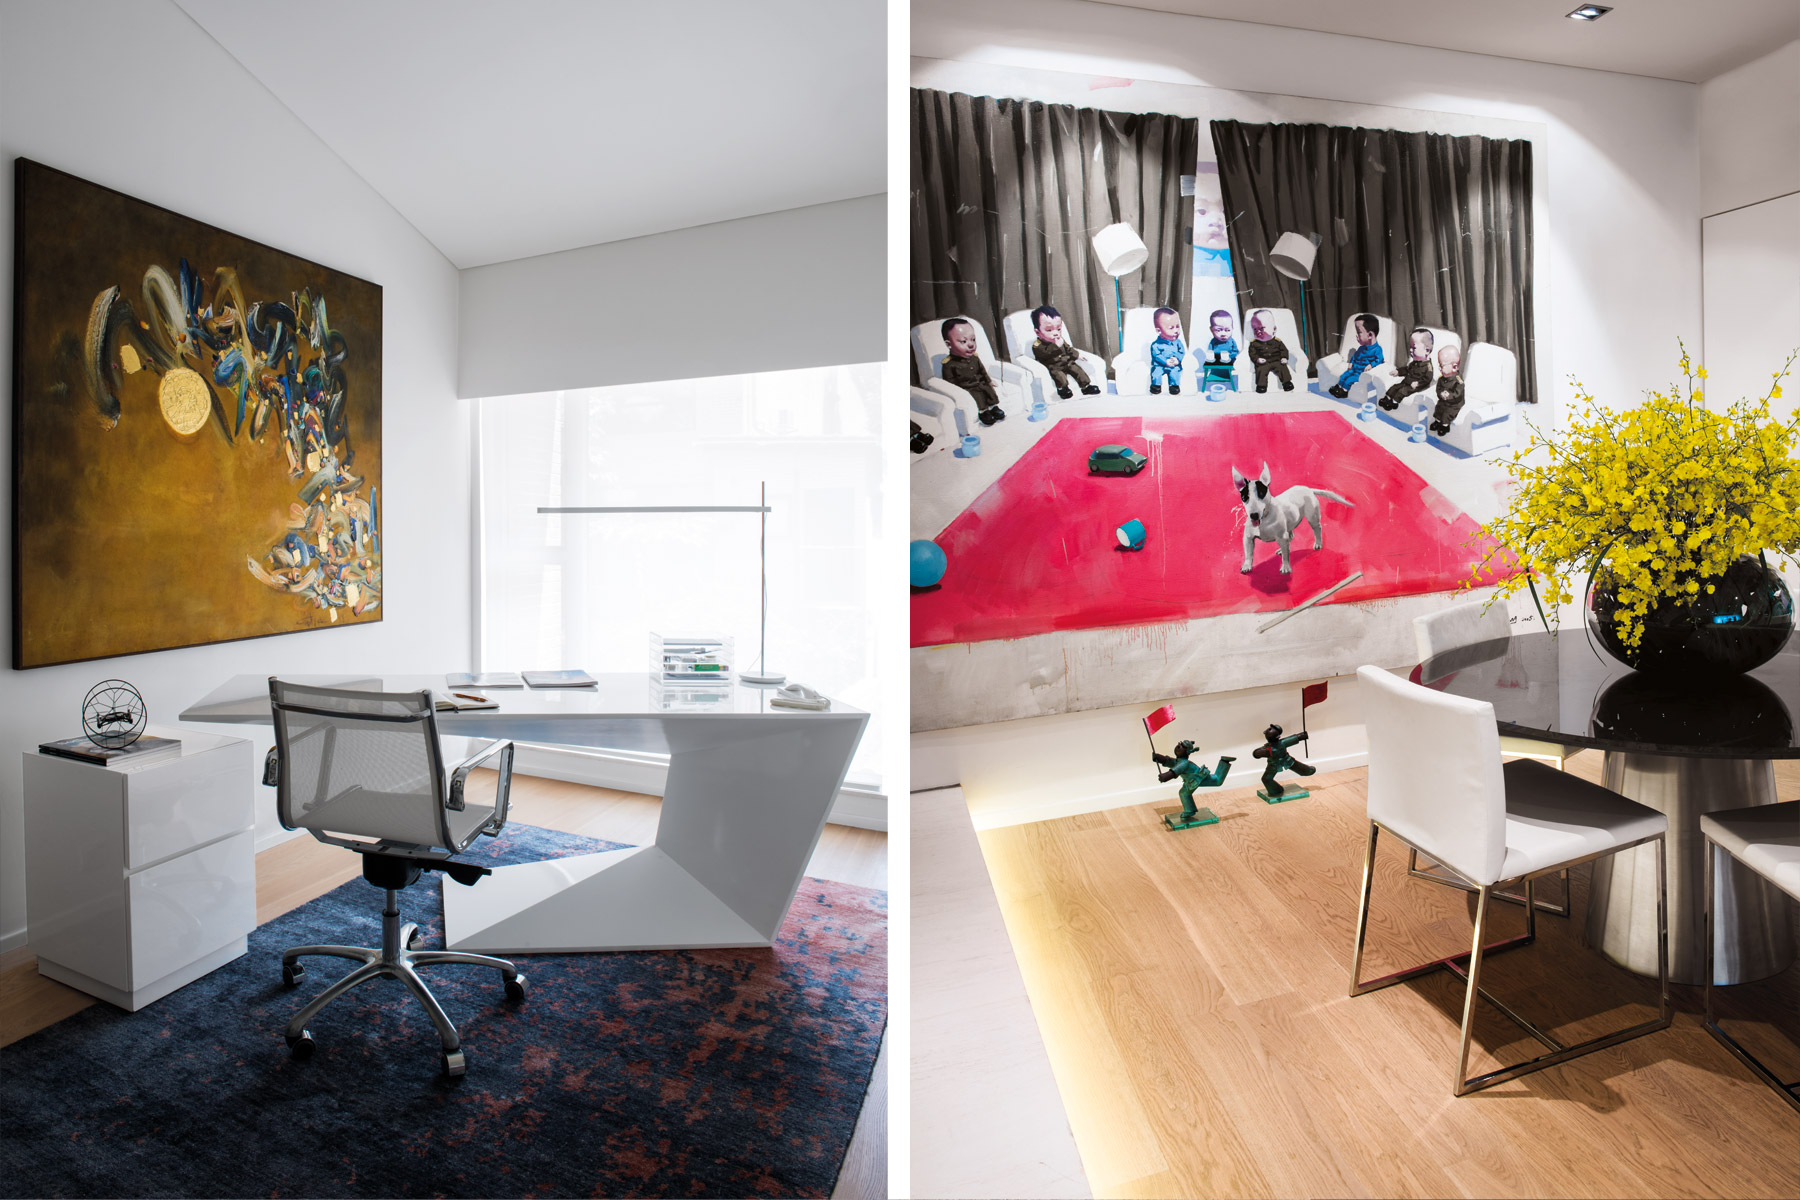 Street art takes centre stage in this sprawling home on The Peak